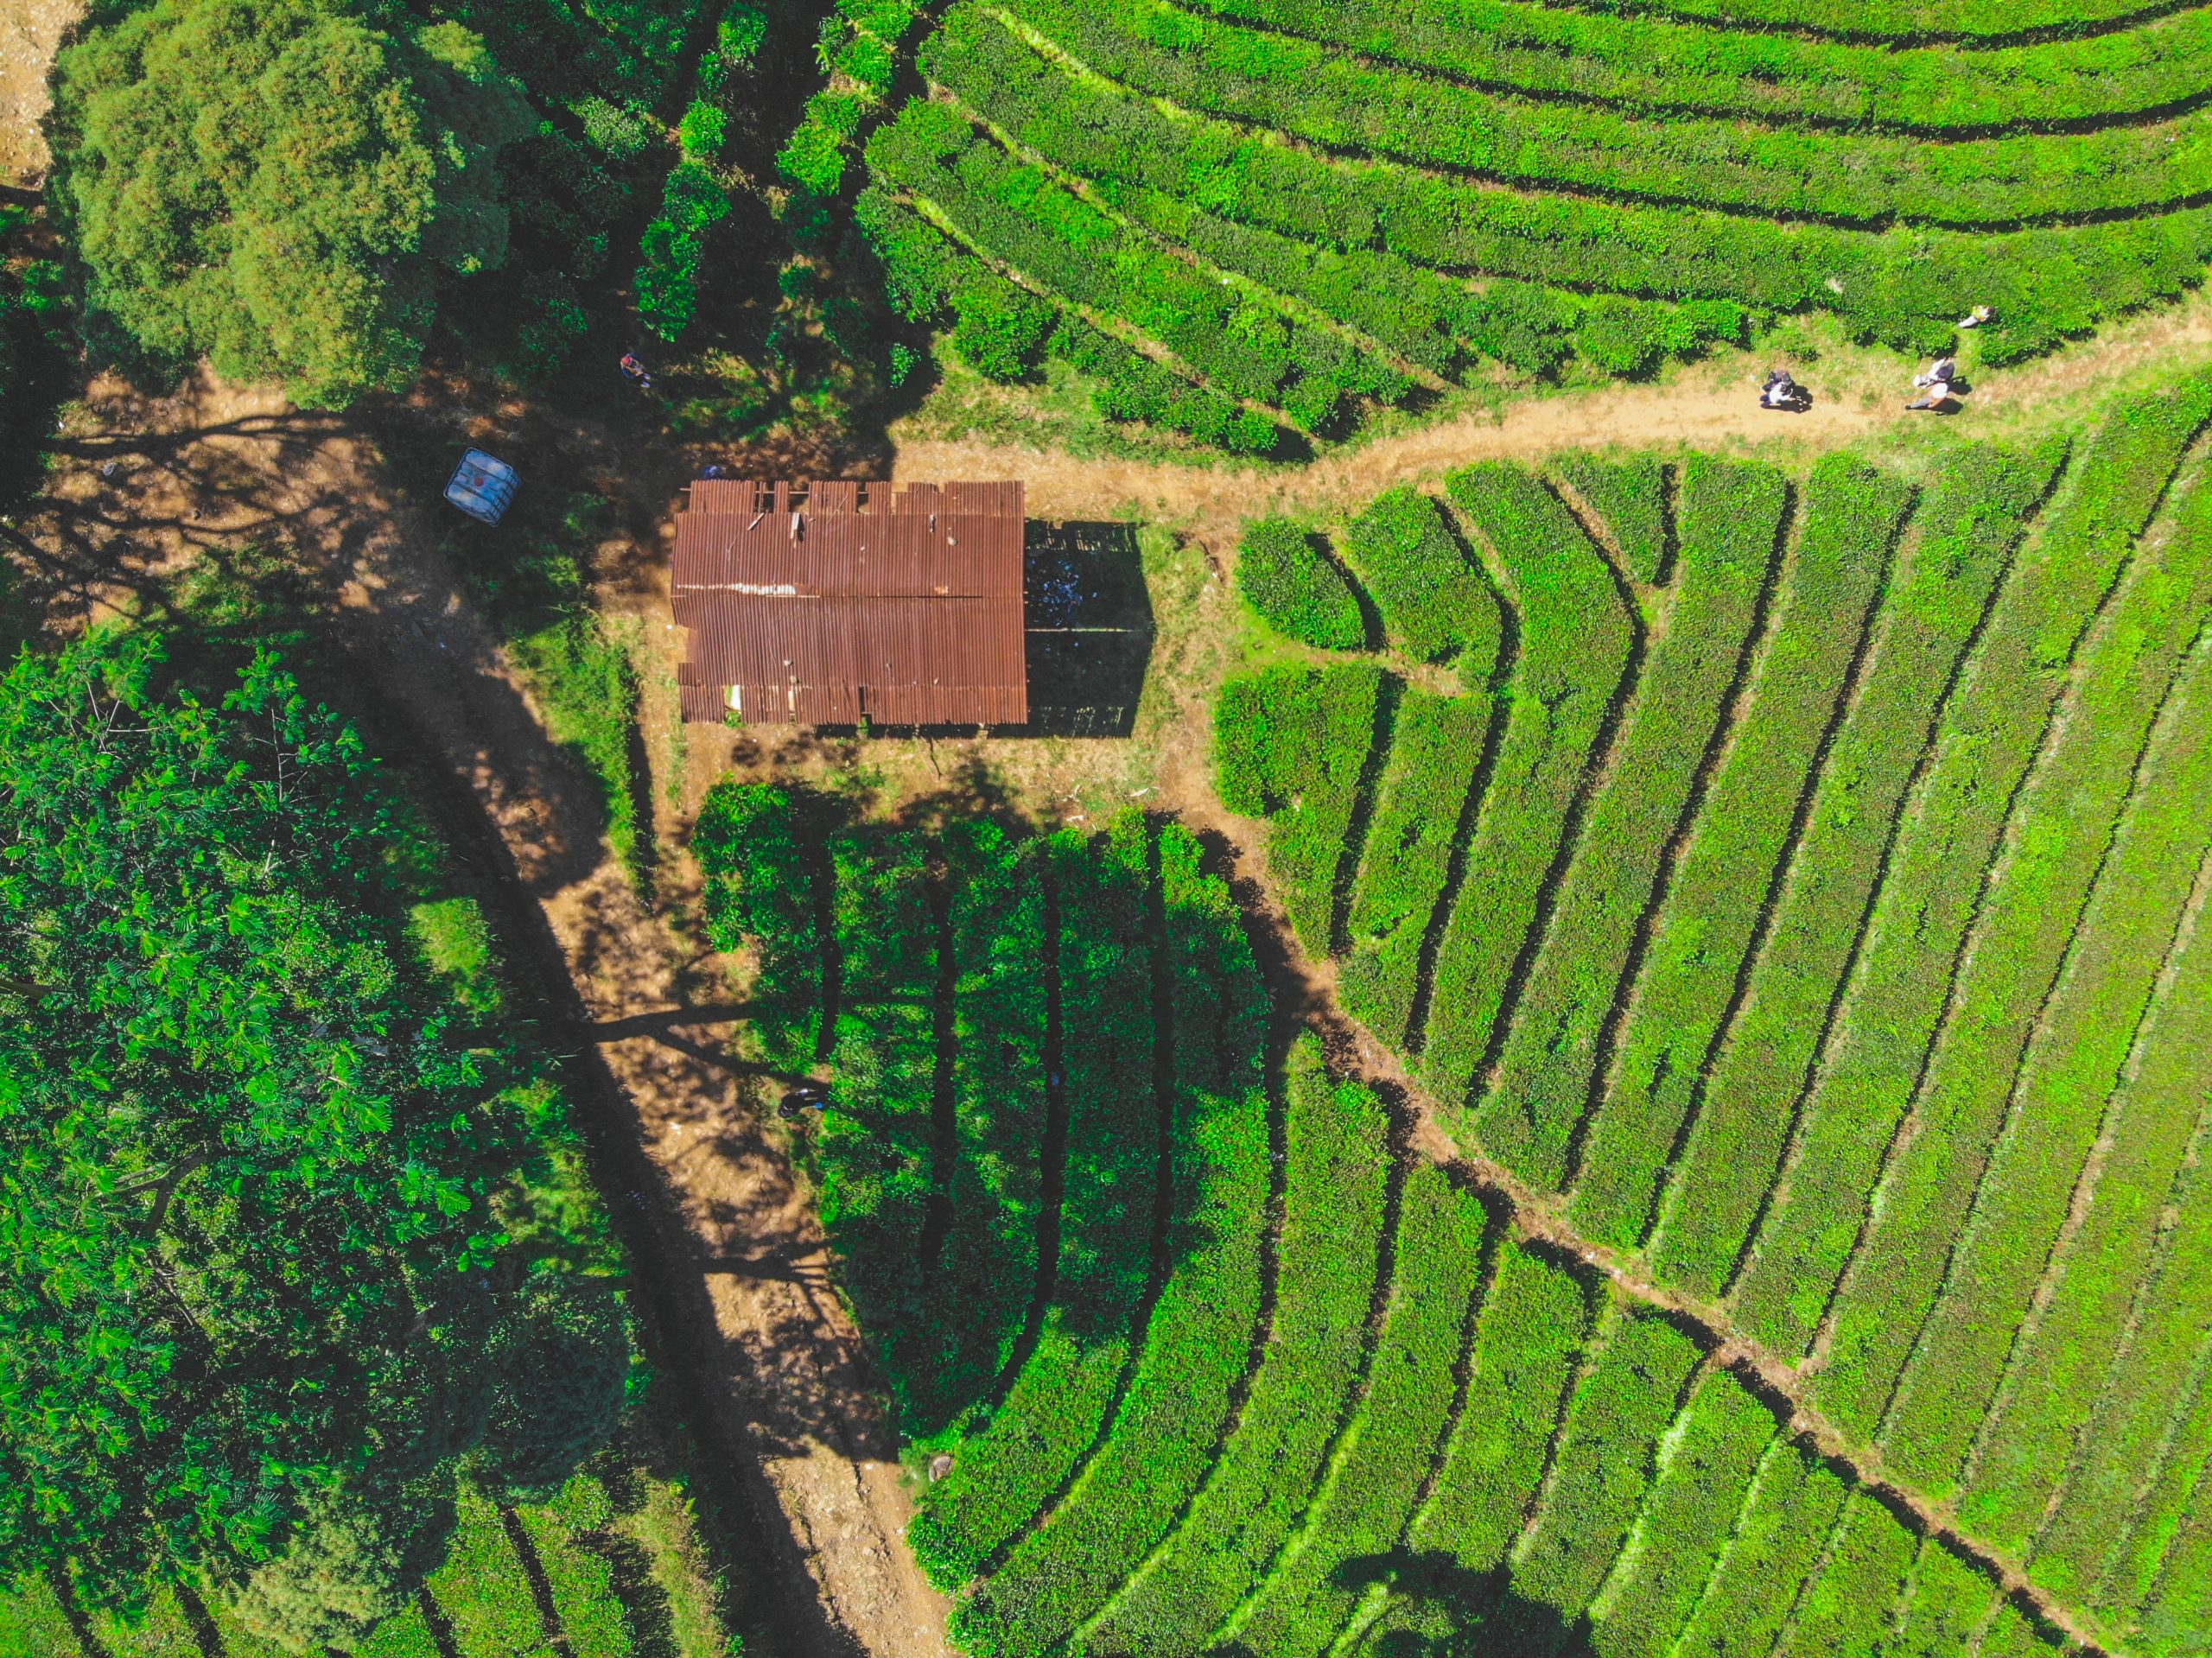 A farm from above